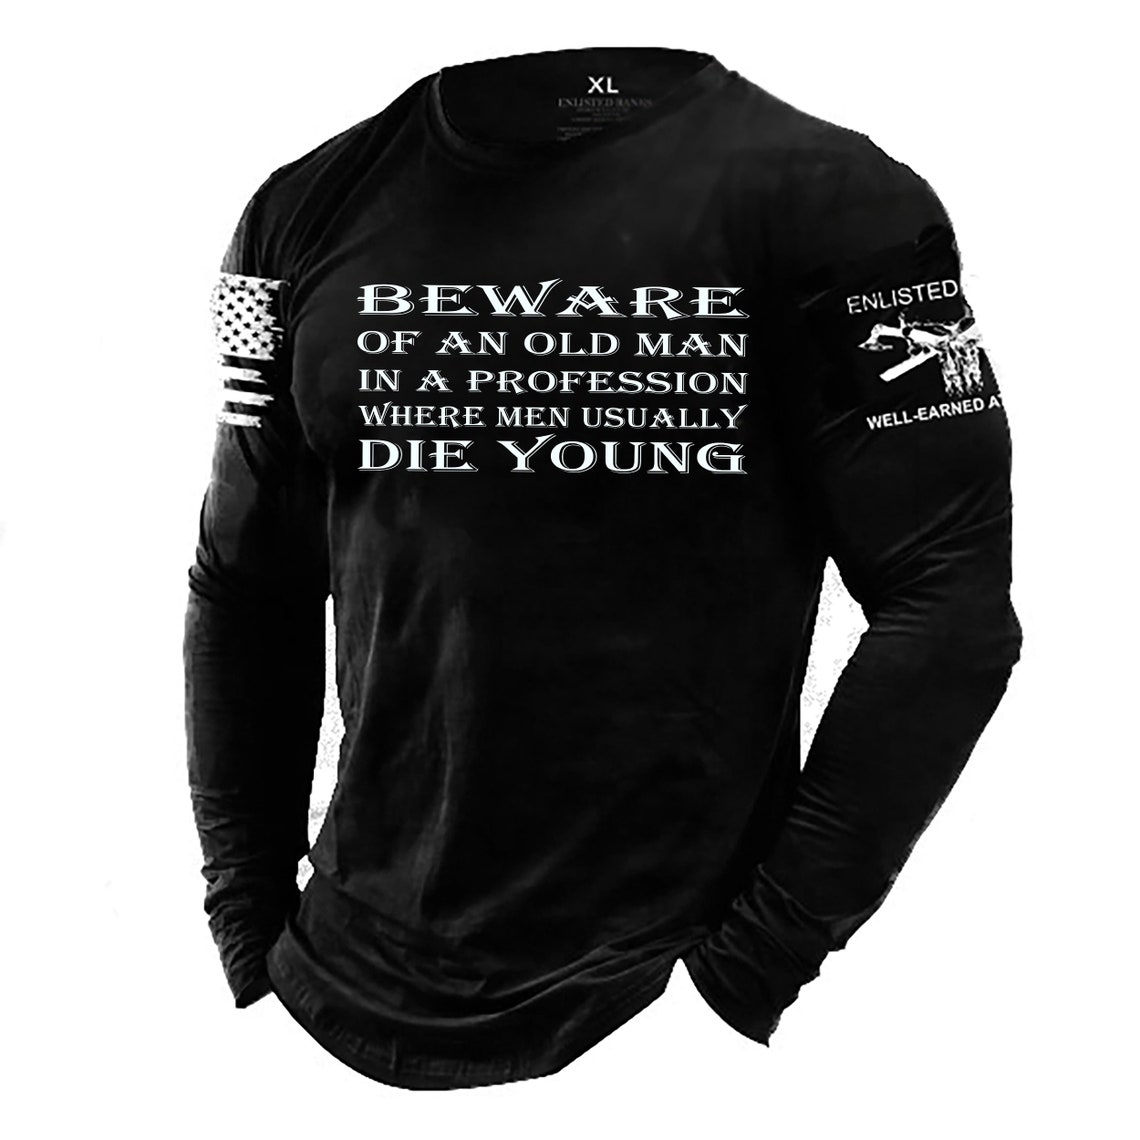 BEWARE Enlisted Ranks Graphic T-shirt Long or Short Sleeve - Etsy